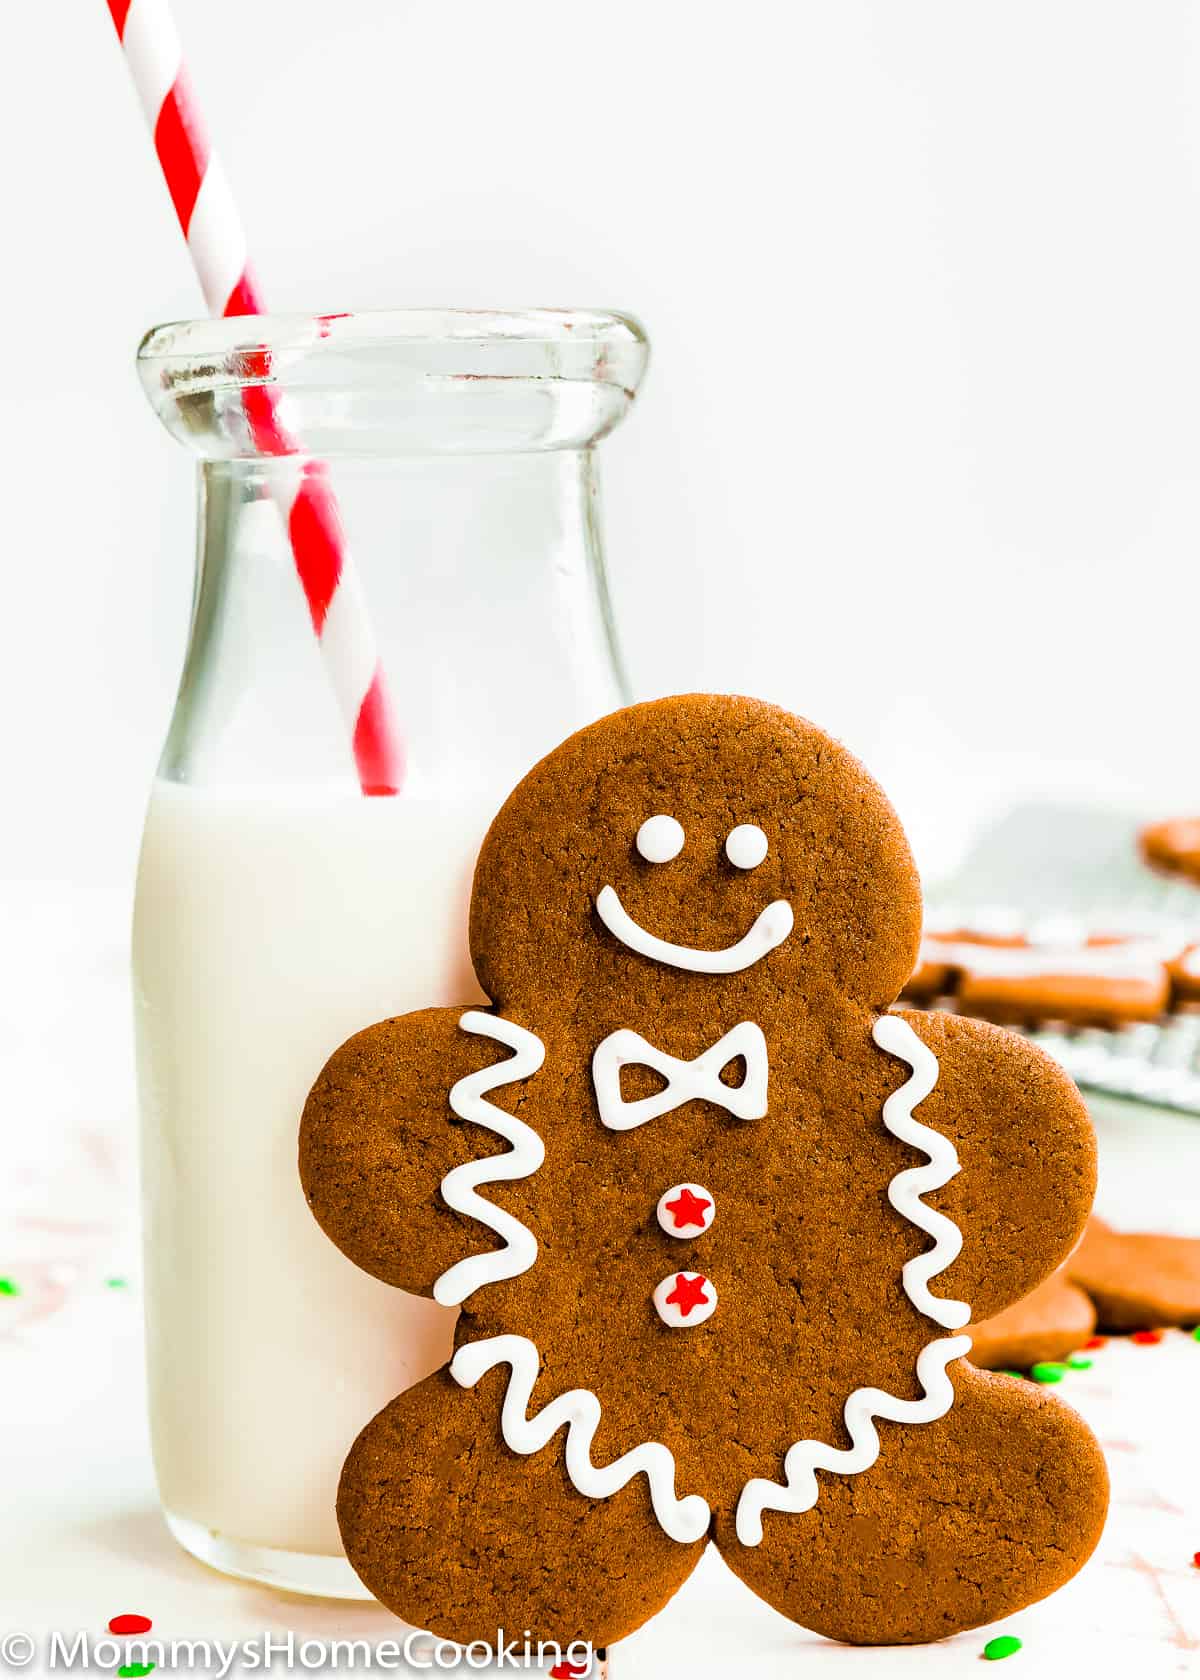 Eggless Gingerbread Cookie with a jar with milk and a red straw.